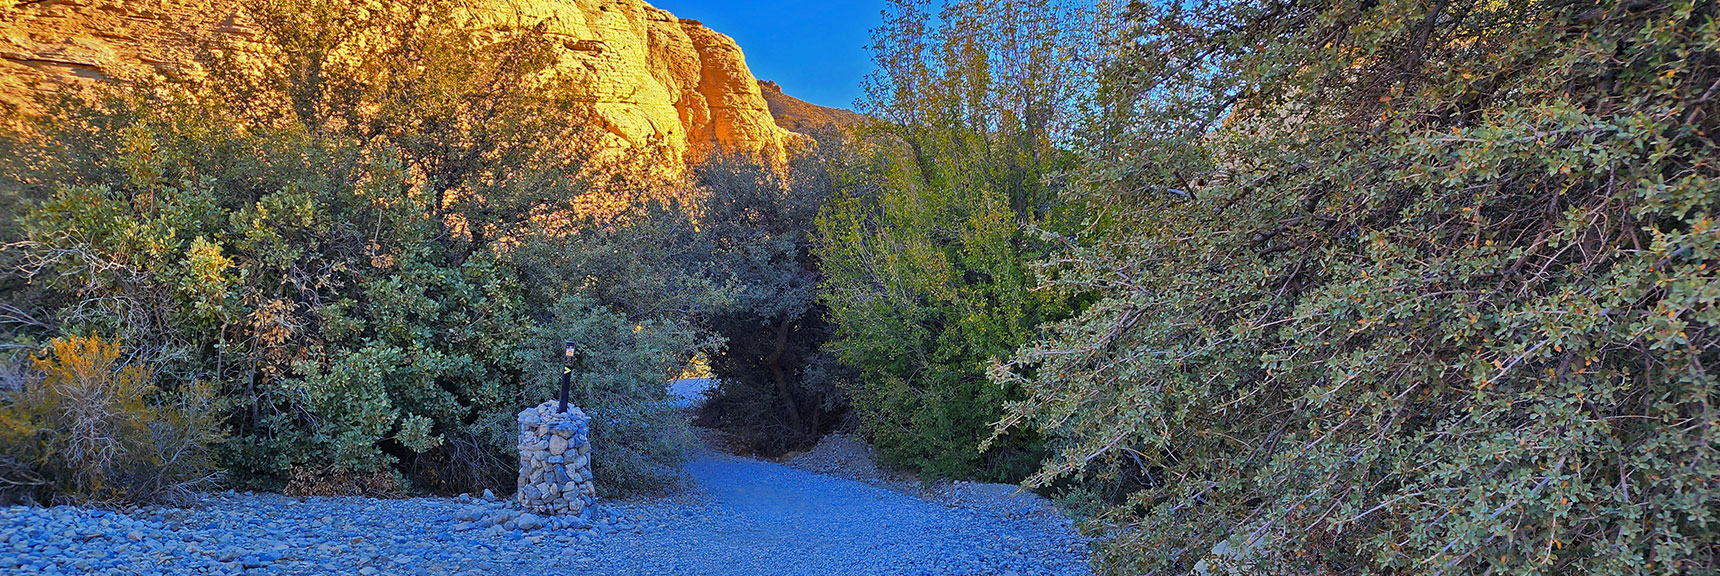 Entering a Magical Forested Climate Zone Leading Into the Calico Tanks Canyon | Calico Tanks | Red Rock Canyon National Conservation Area, Nevada